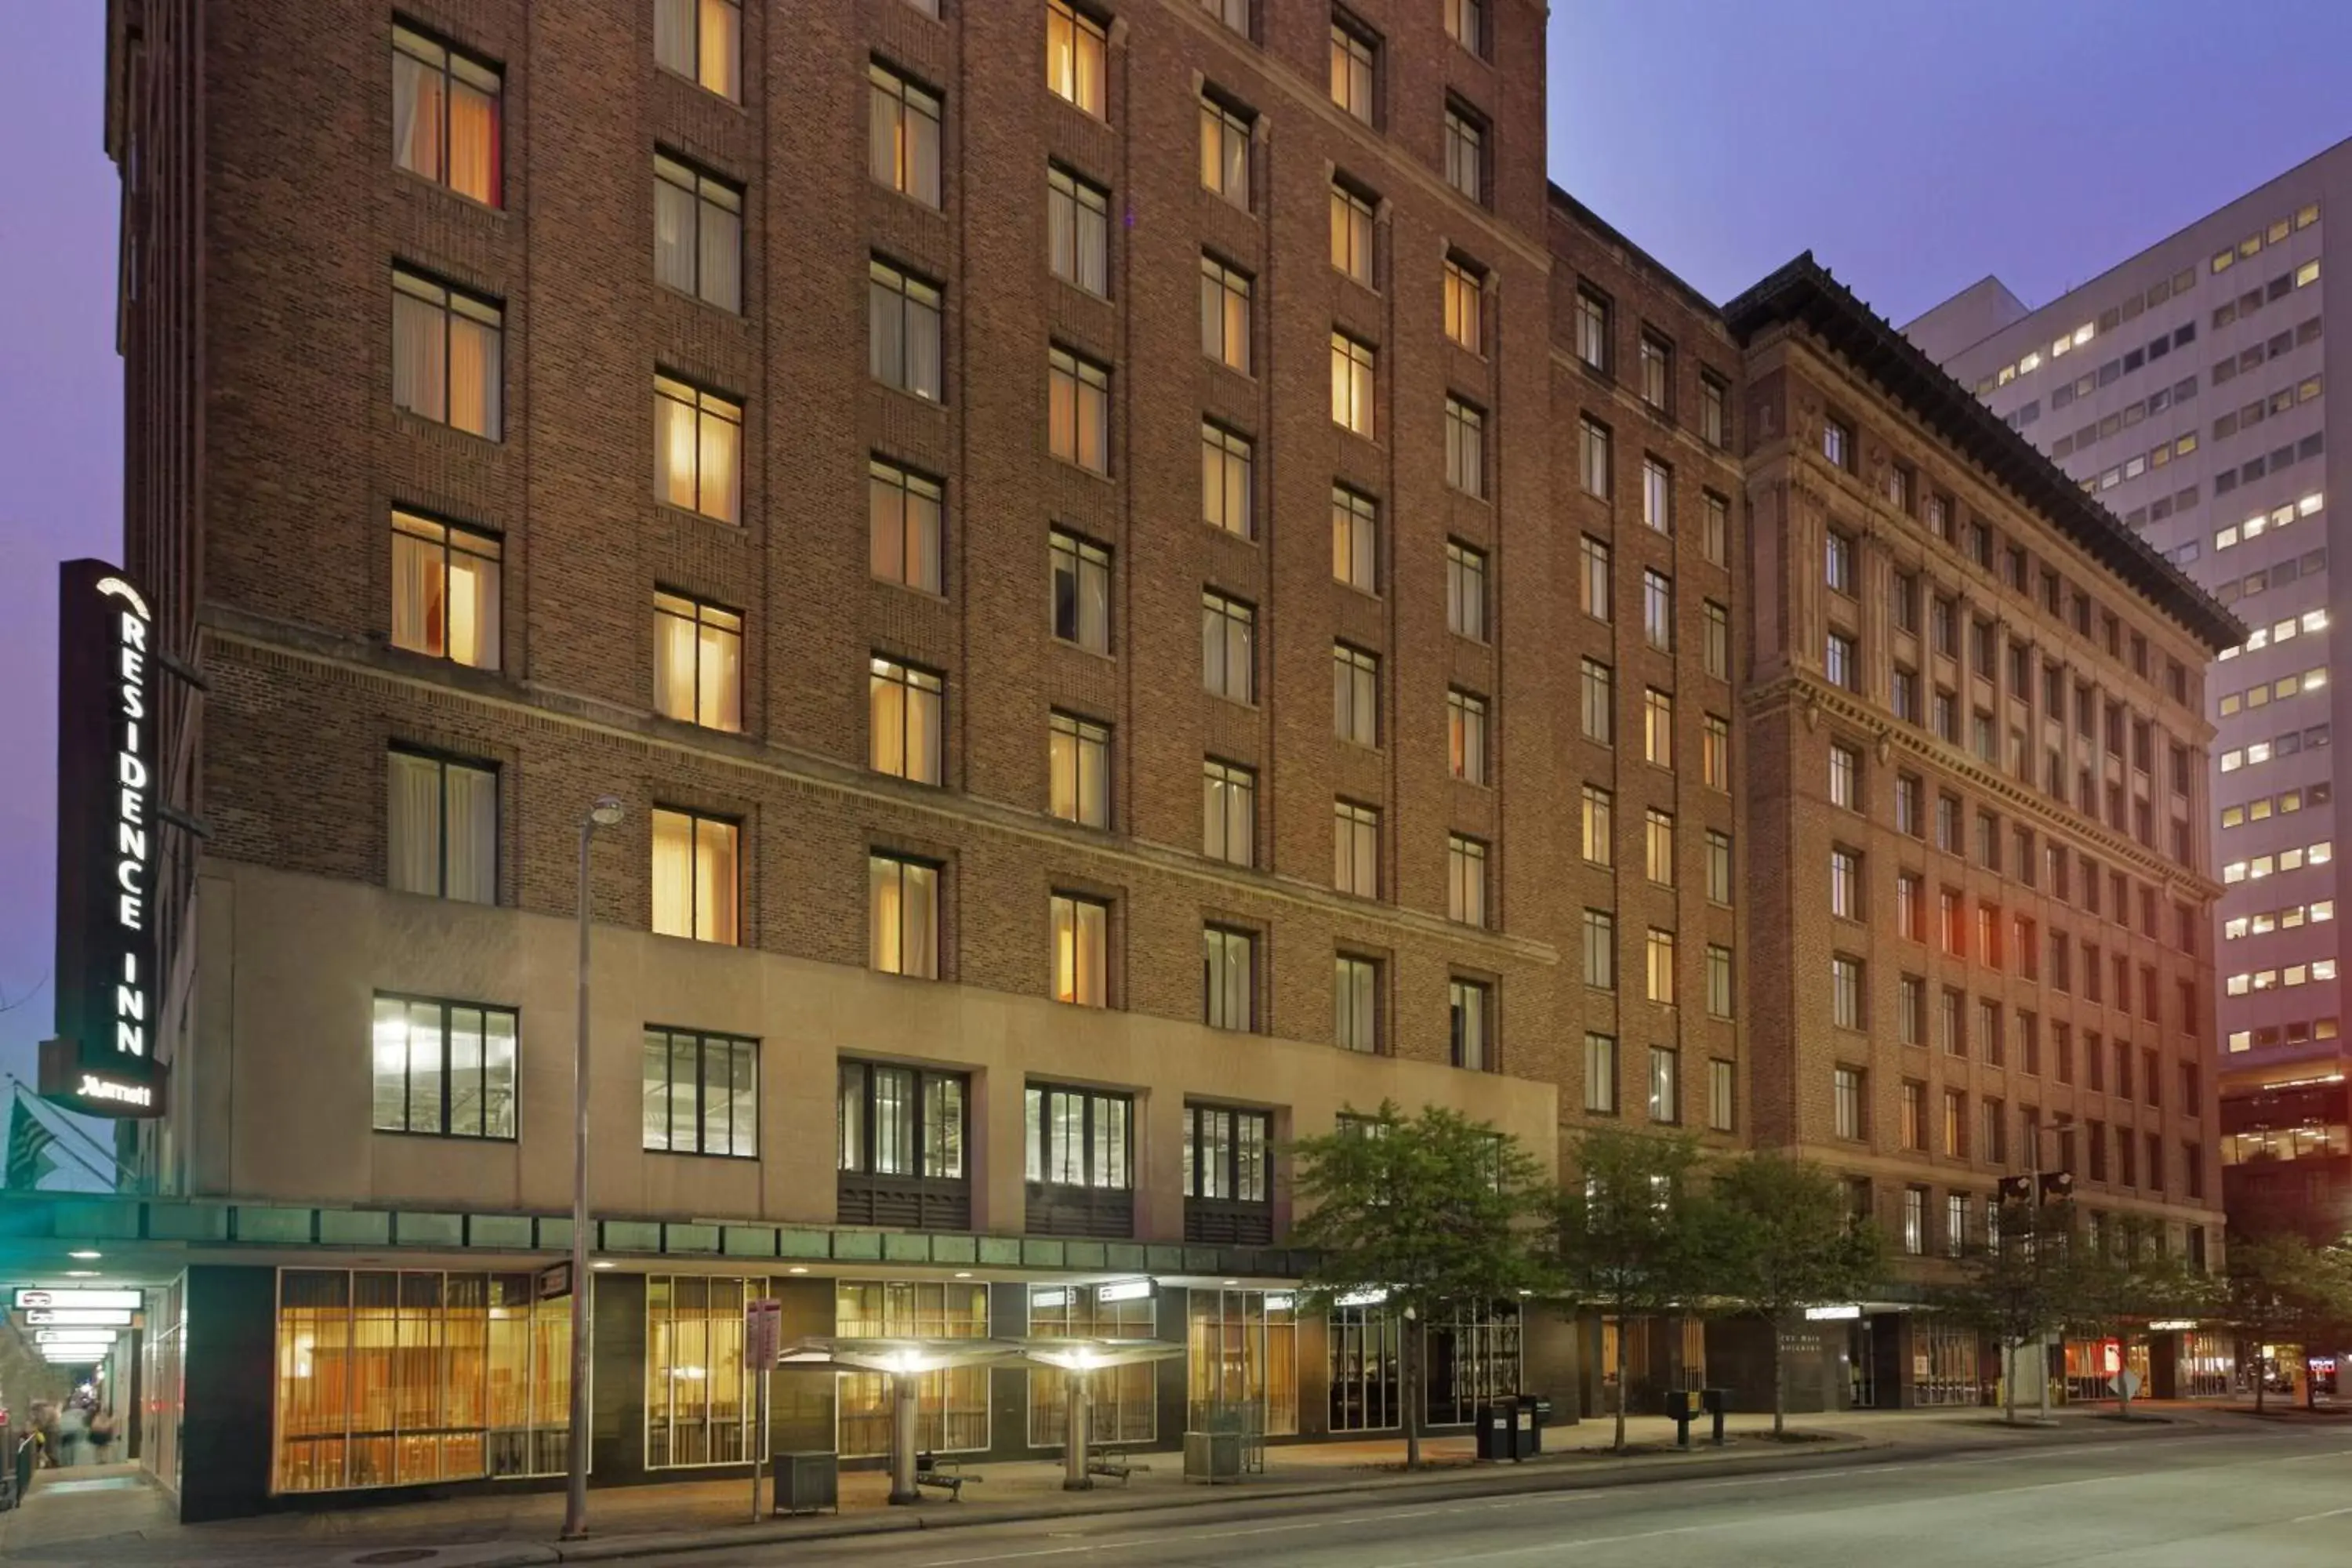 Property Building in Residence Inn Houston Downtown/Convention Center